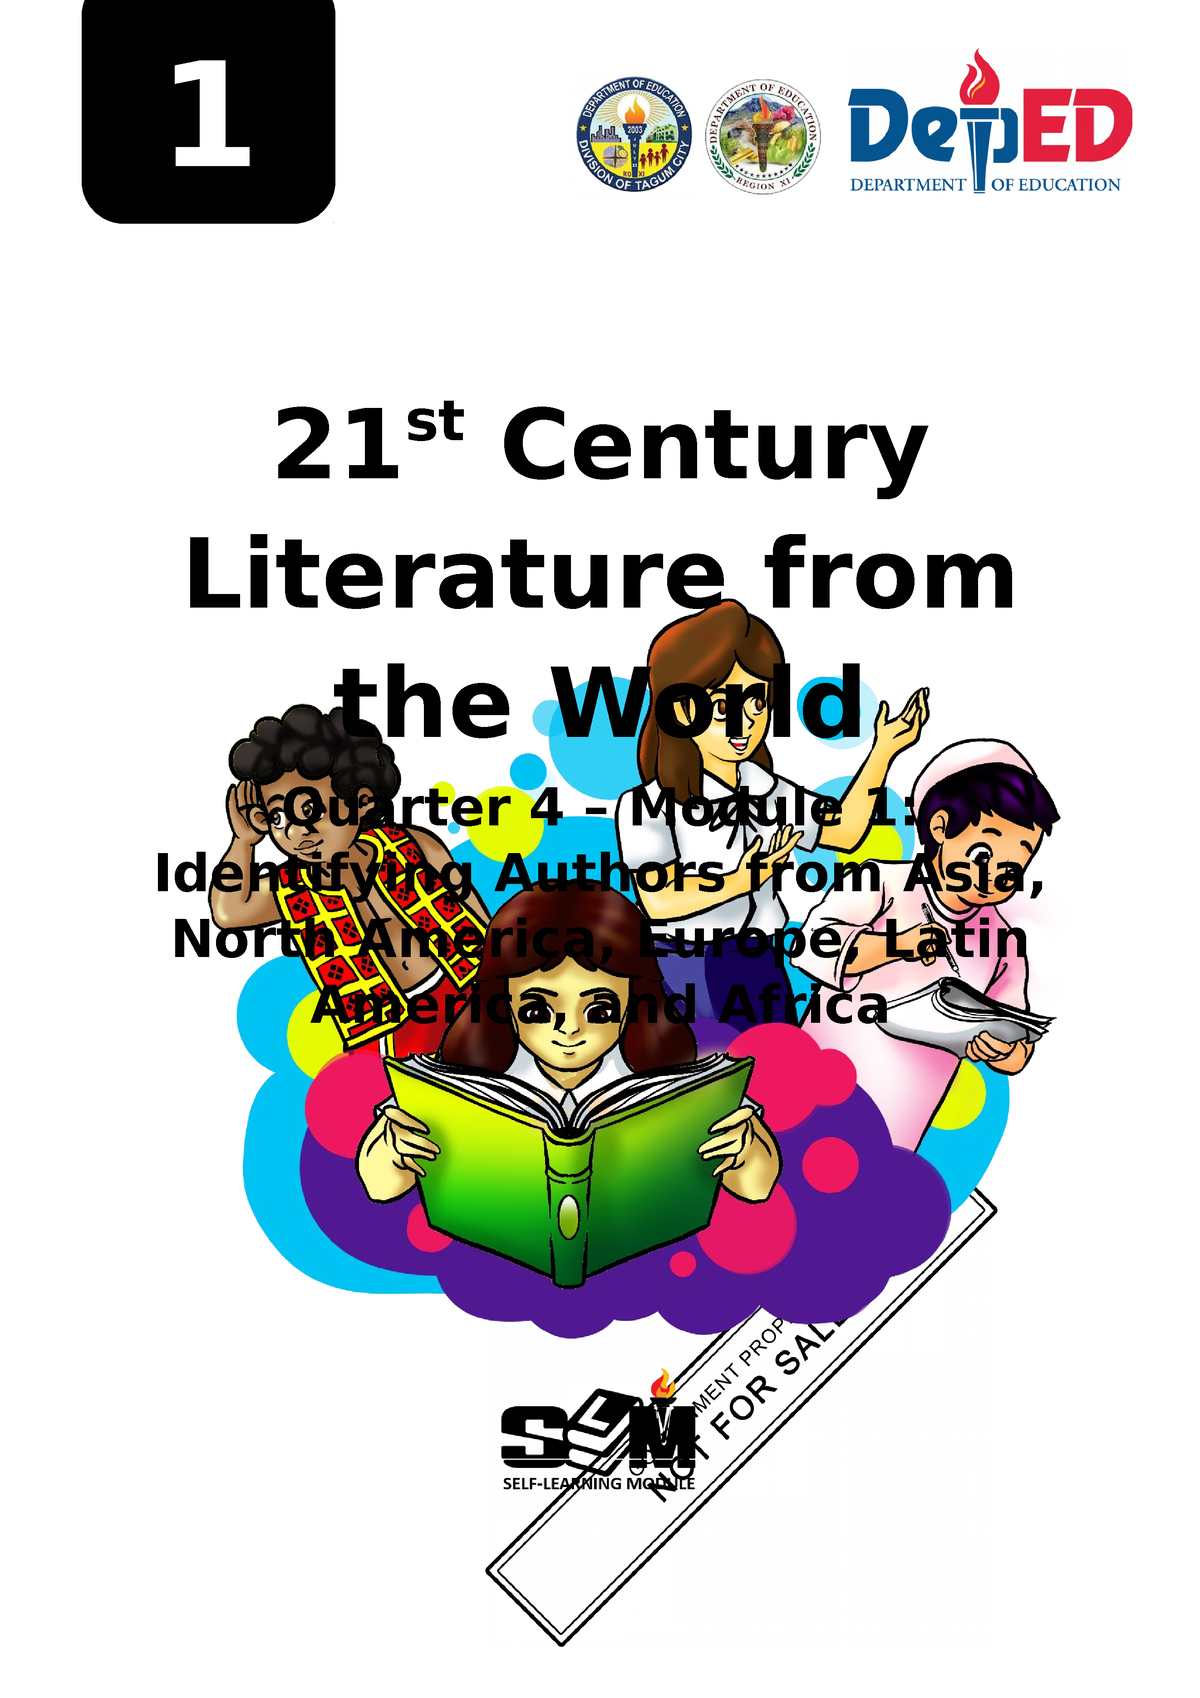 meaning of literature in 21st century